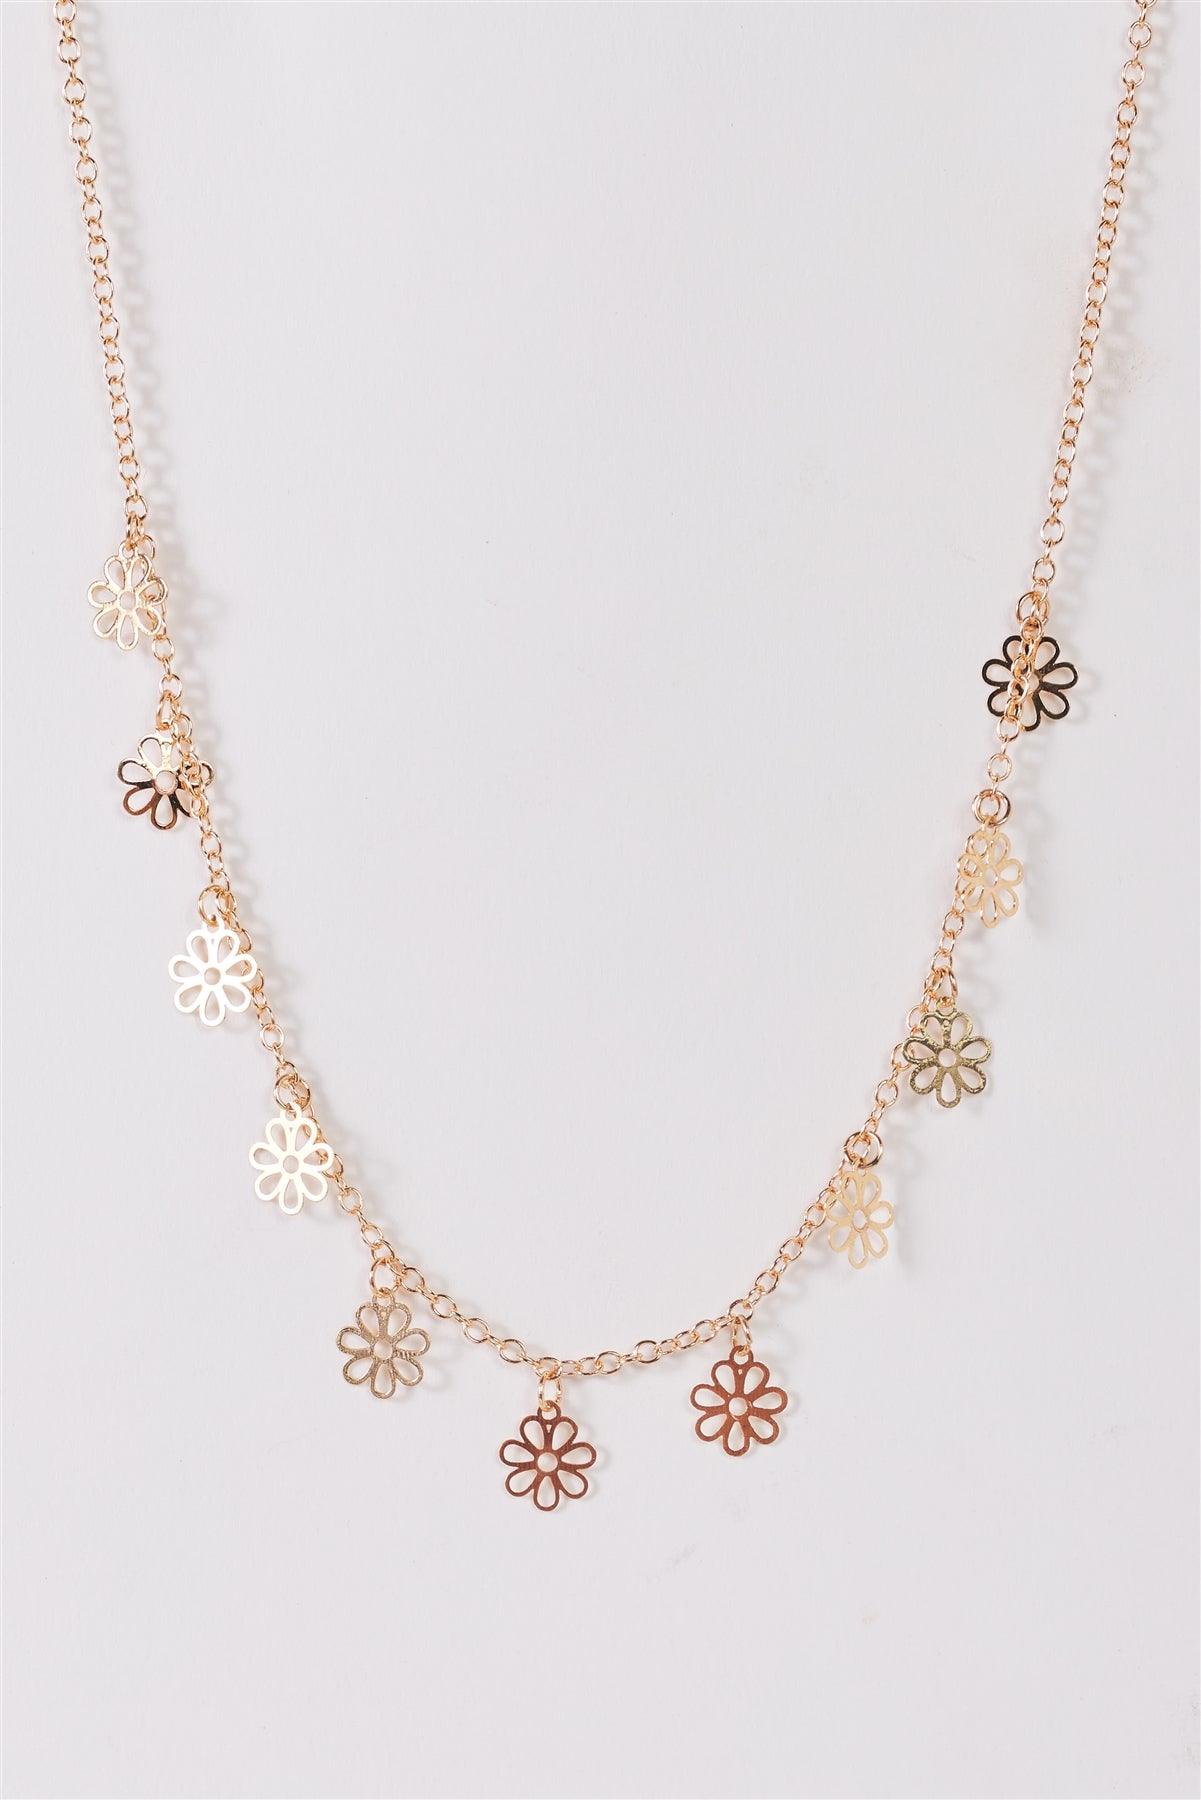 Gold Short Chain With Laser Cut Daisy Charms Necklace /3 Pieces